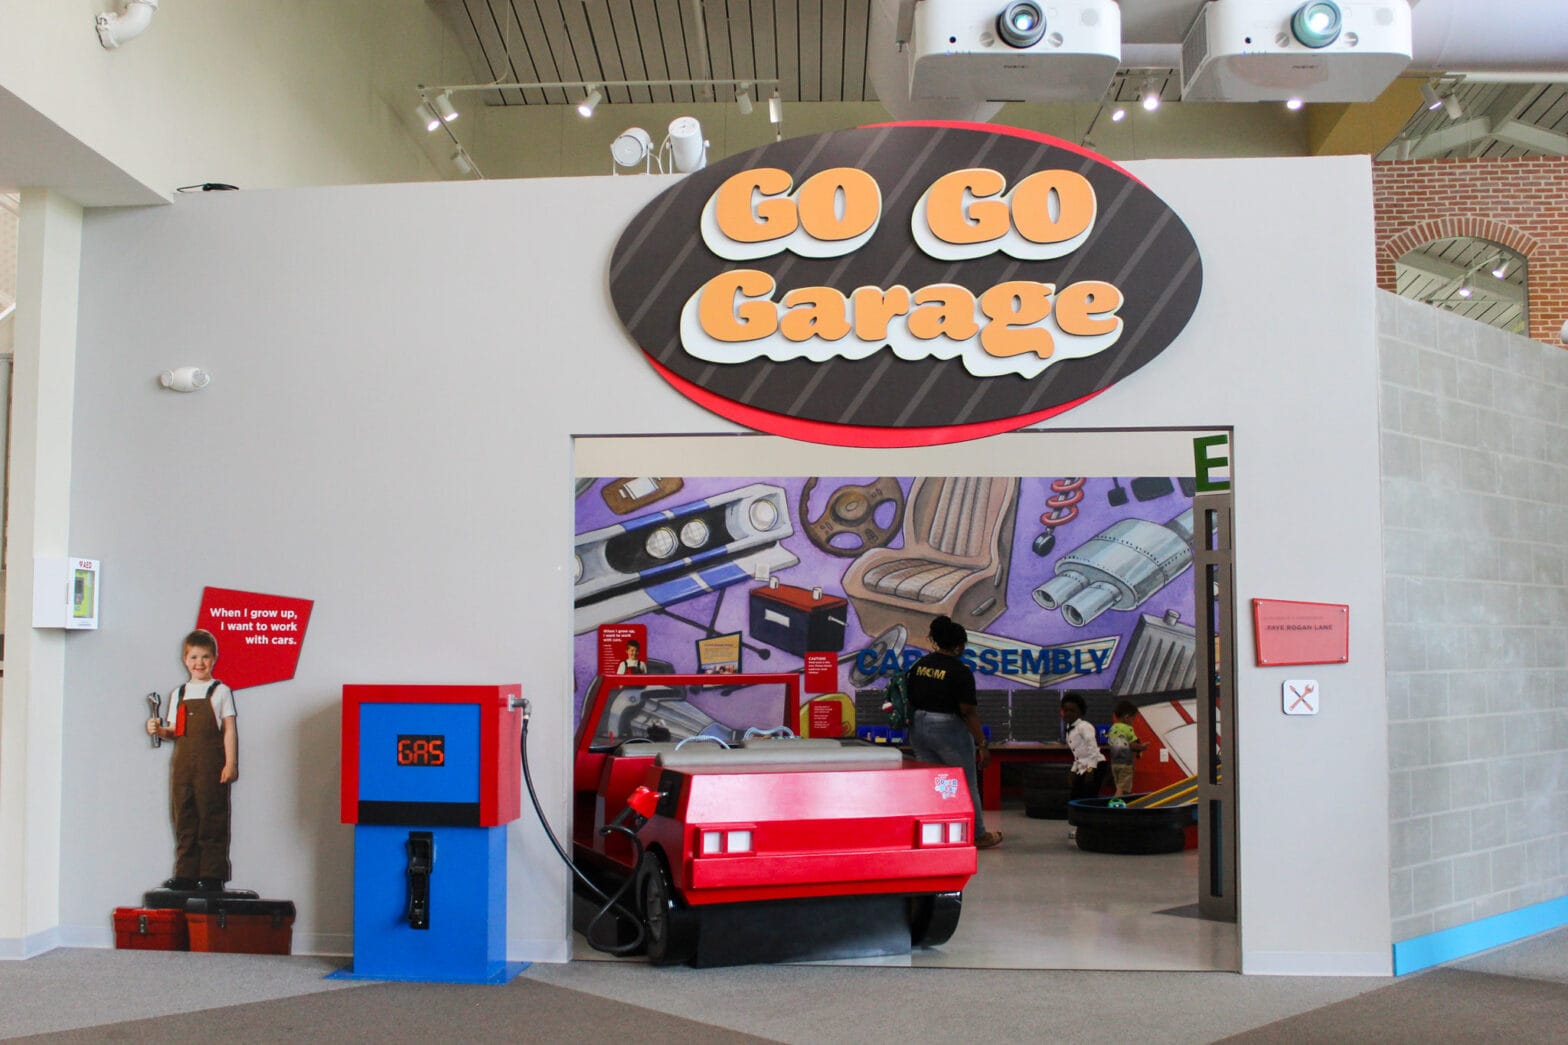 The entrance to the Go Go Garage with a fake gas pump and a life size toy car.